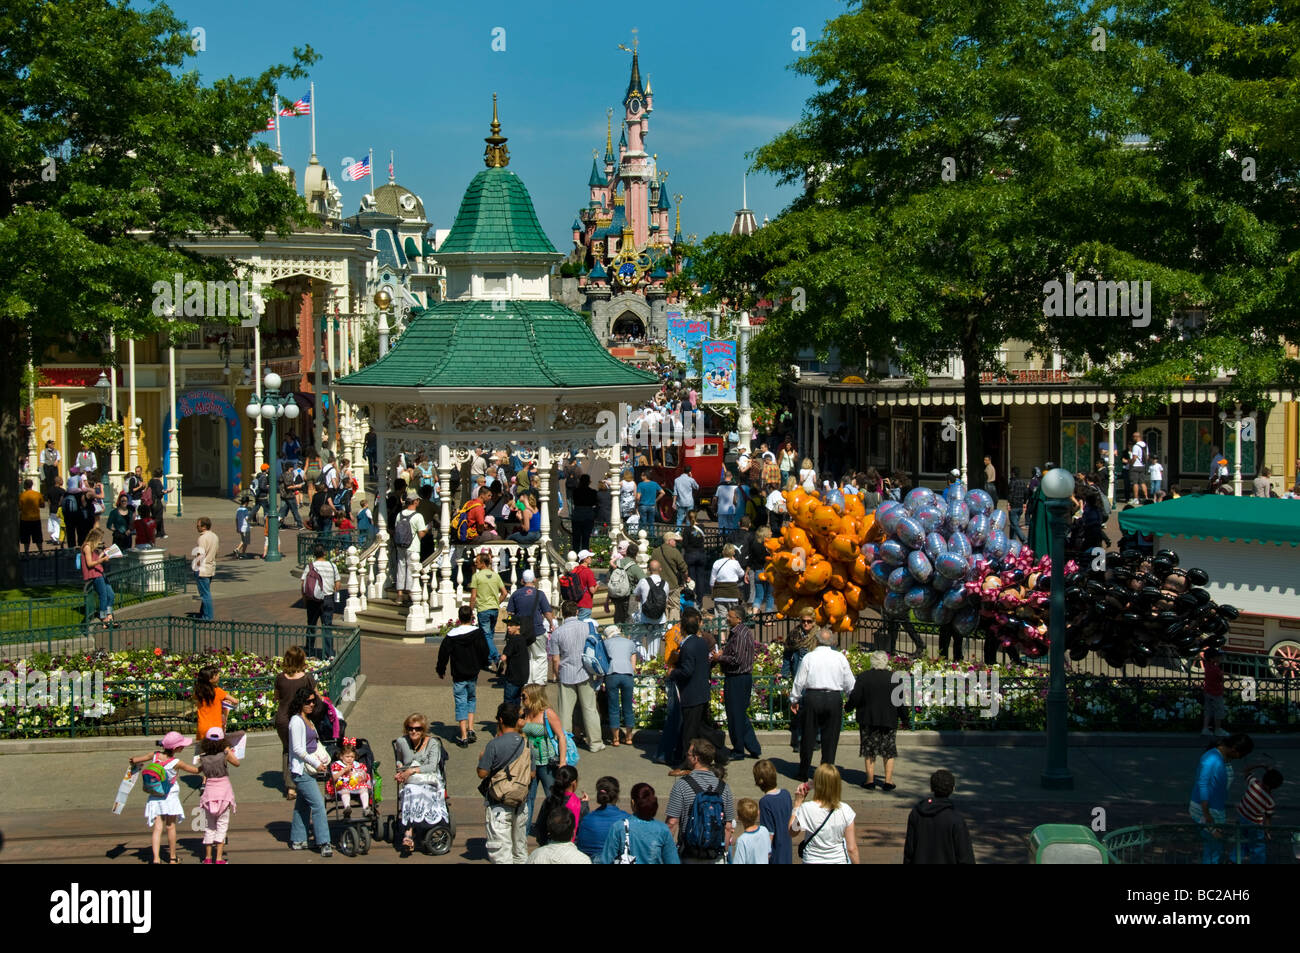 France, "Theme Parks" Large Crowd of People, Tourists Visiting Disneyland  Paris, General Overview, Tourist Attraction, overtourism Stock Photo - Alamy